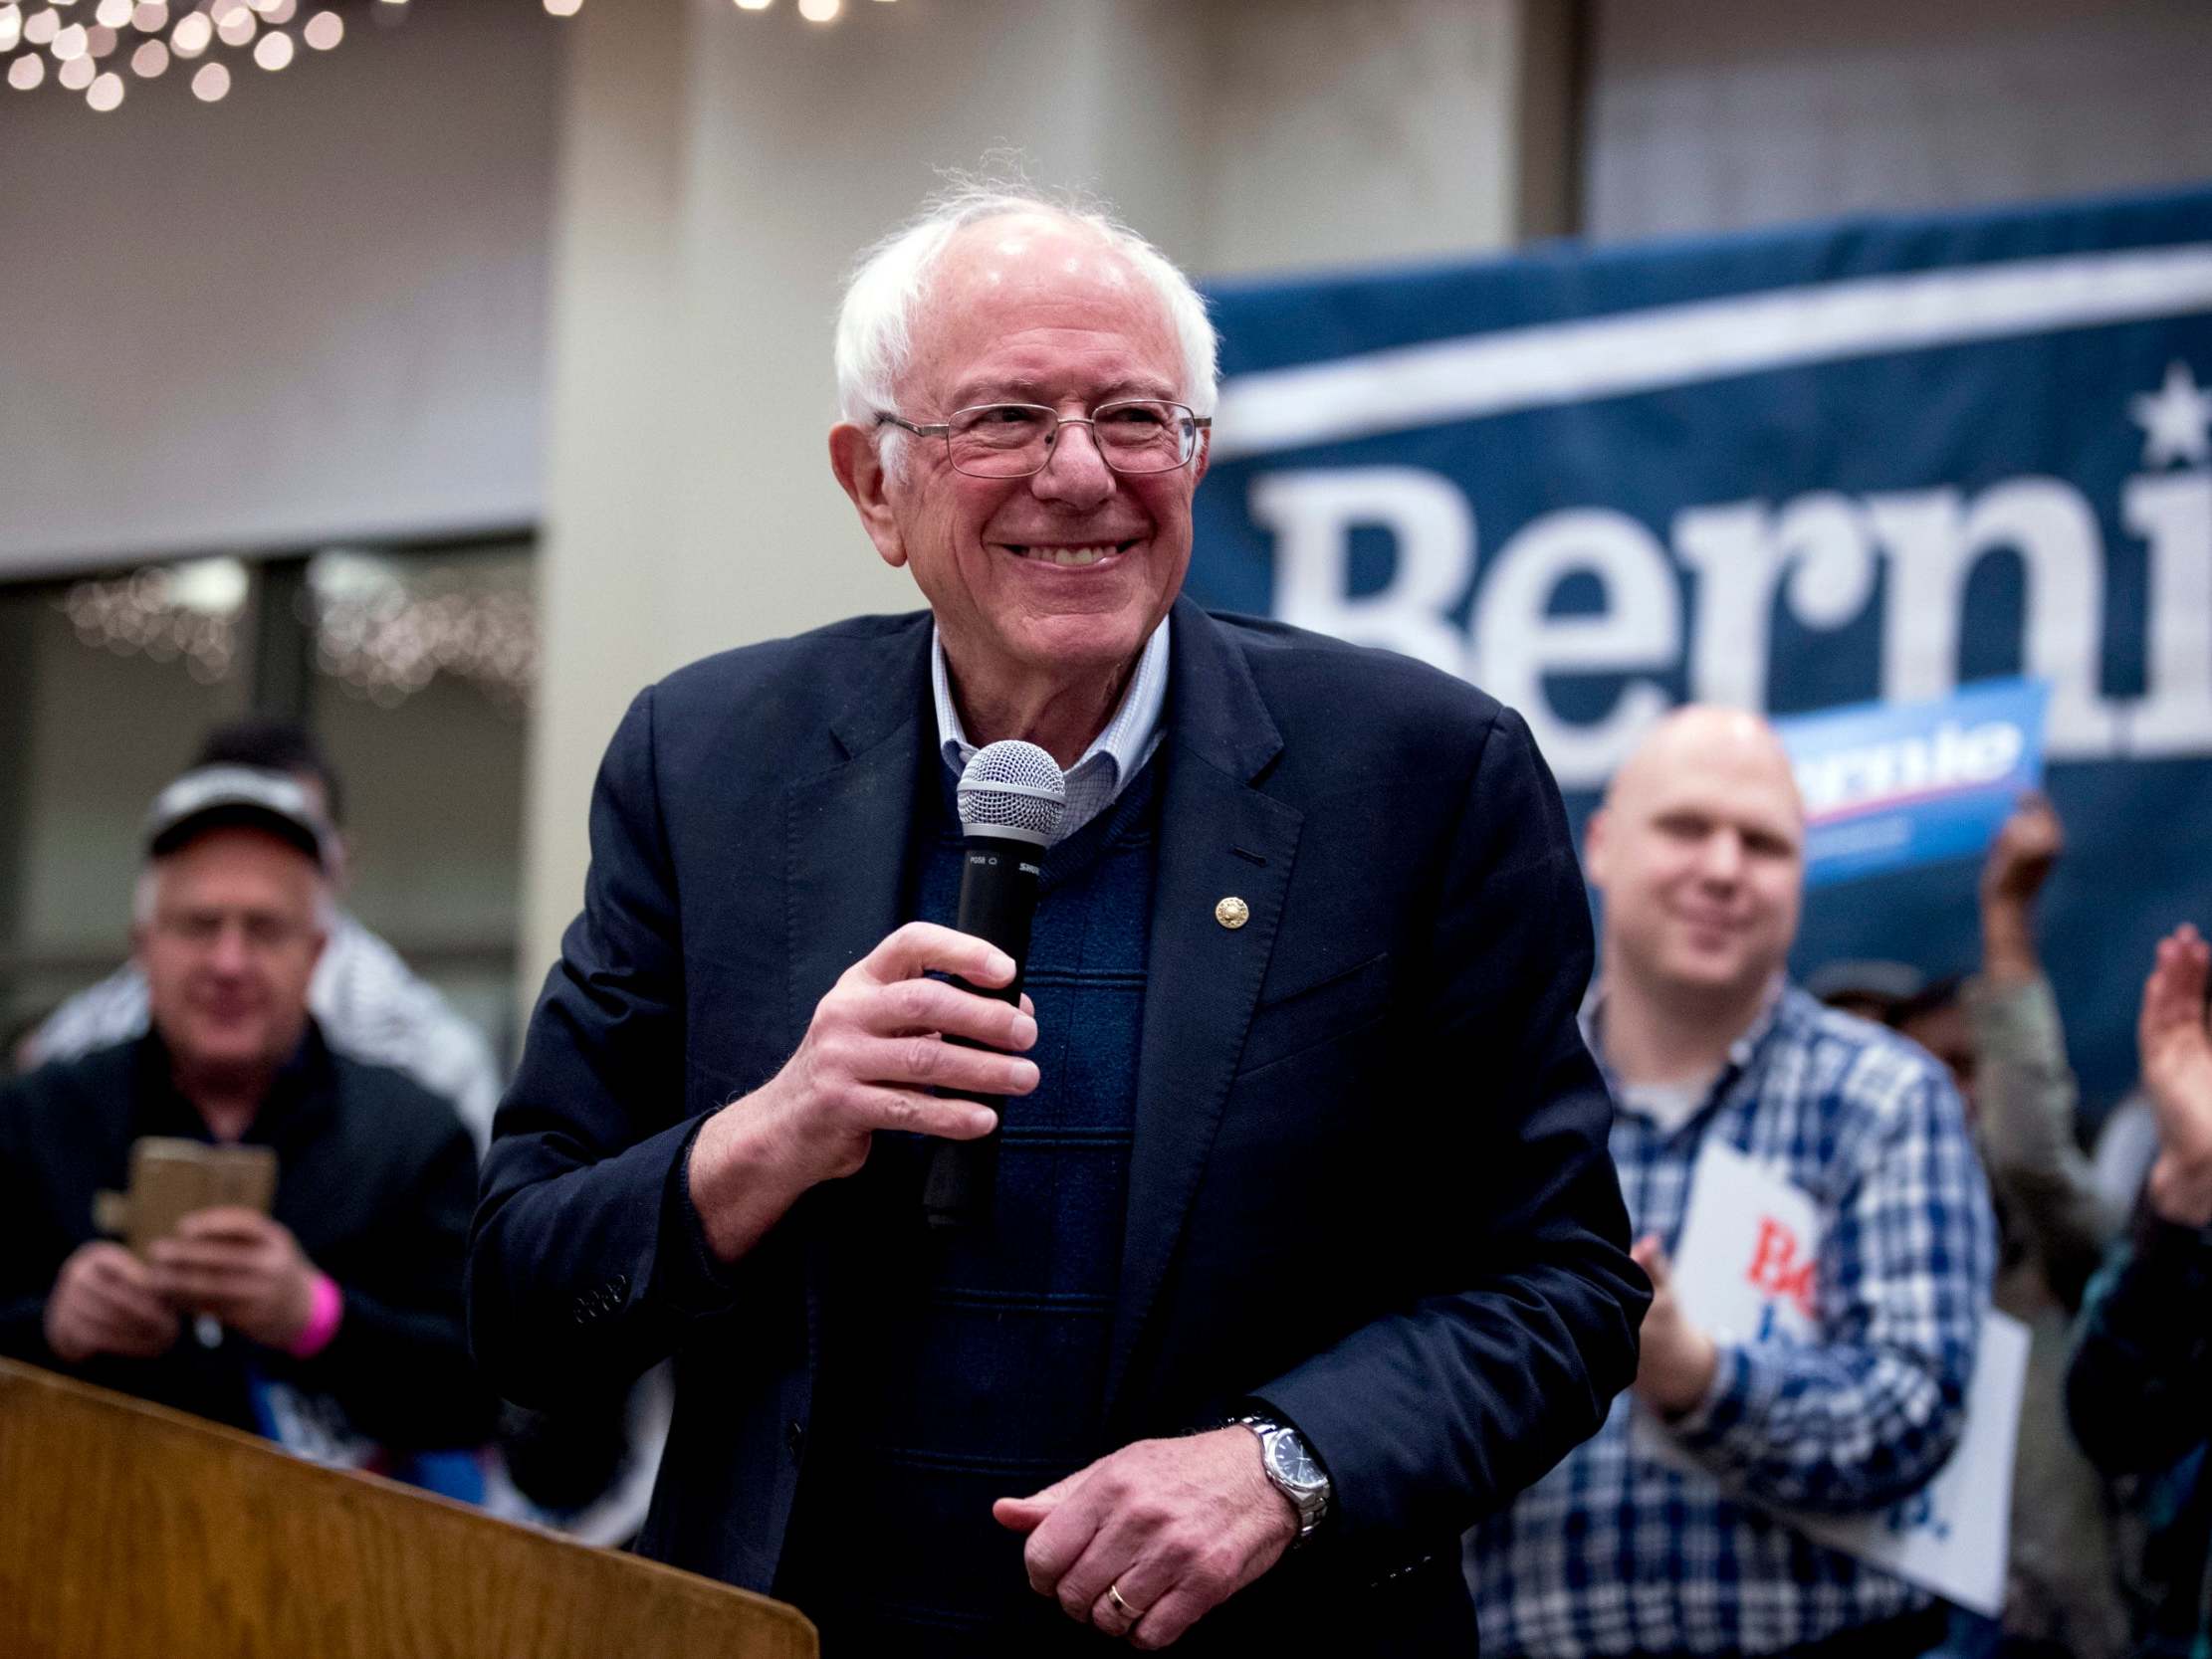 Democratic presidential candidate Bernie Sanders speaks at a campaign stop at St Ambrose University on 11 January 2020